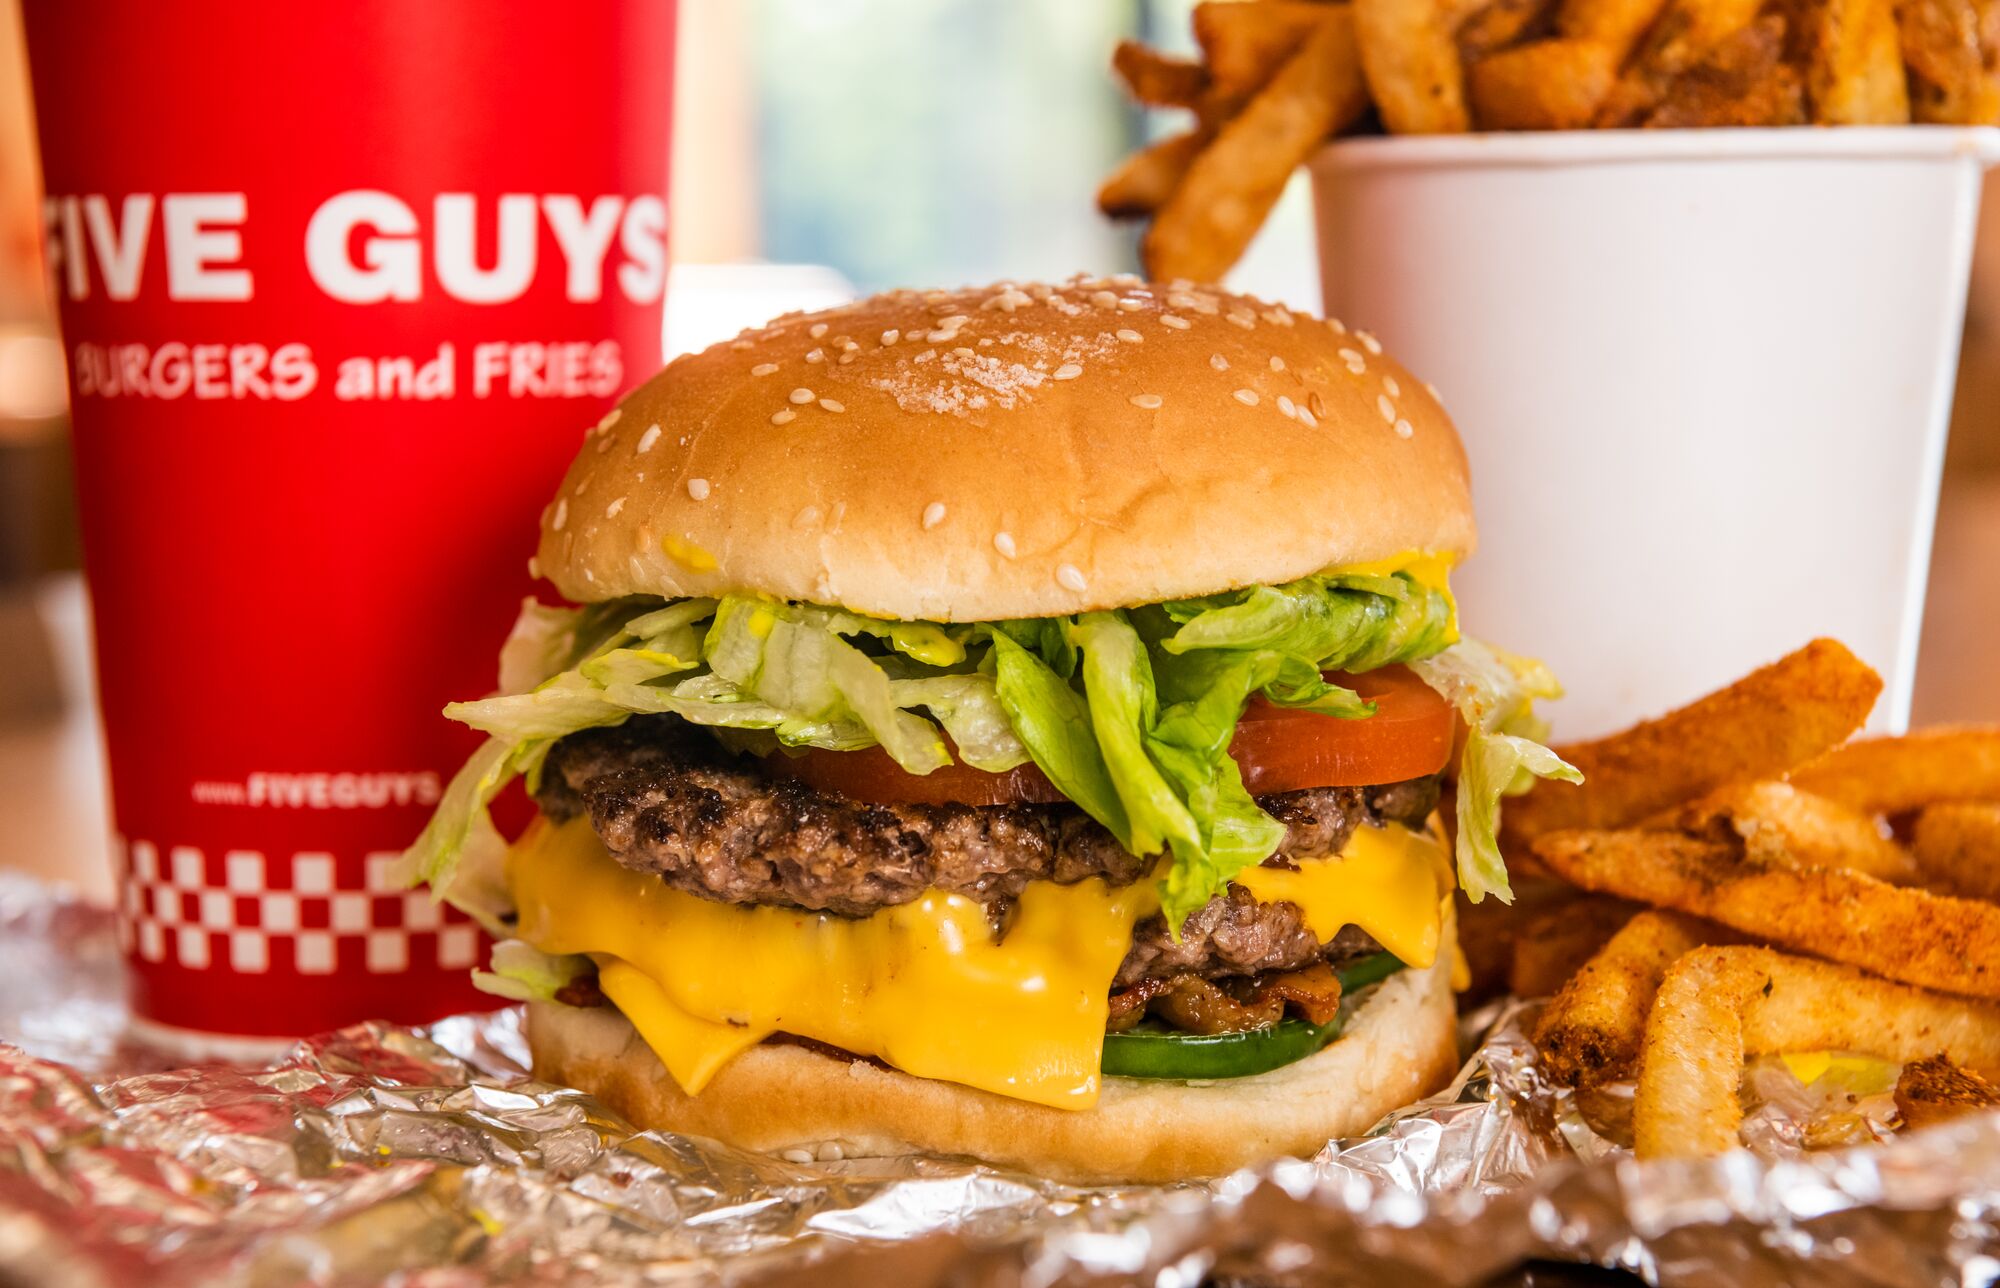 A close-up photograph of a Five Guys cheeseburger, soft drink in red Five Guys cup, and regular orde Five Guys Thousand Oaks (805)496-0173